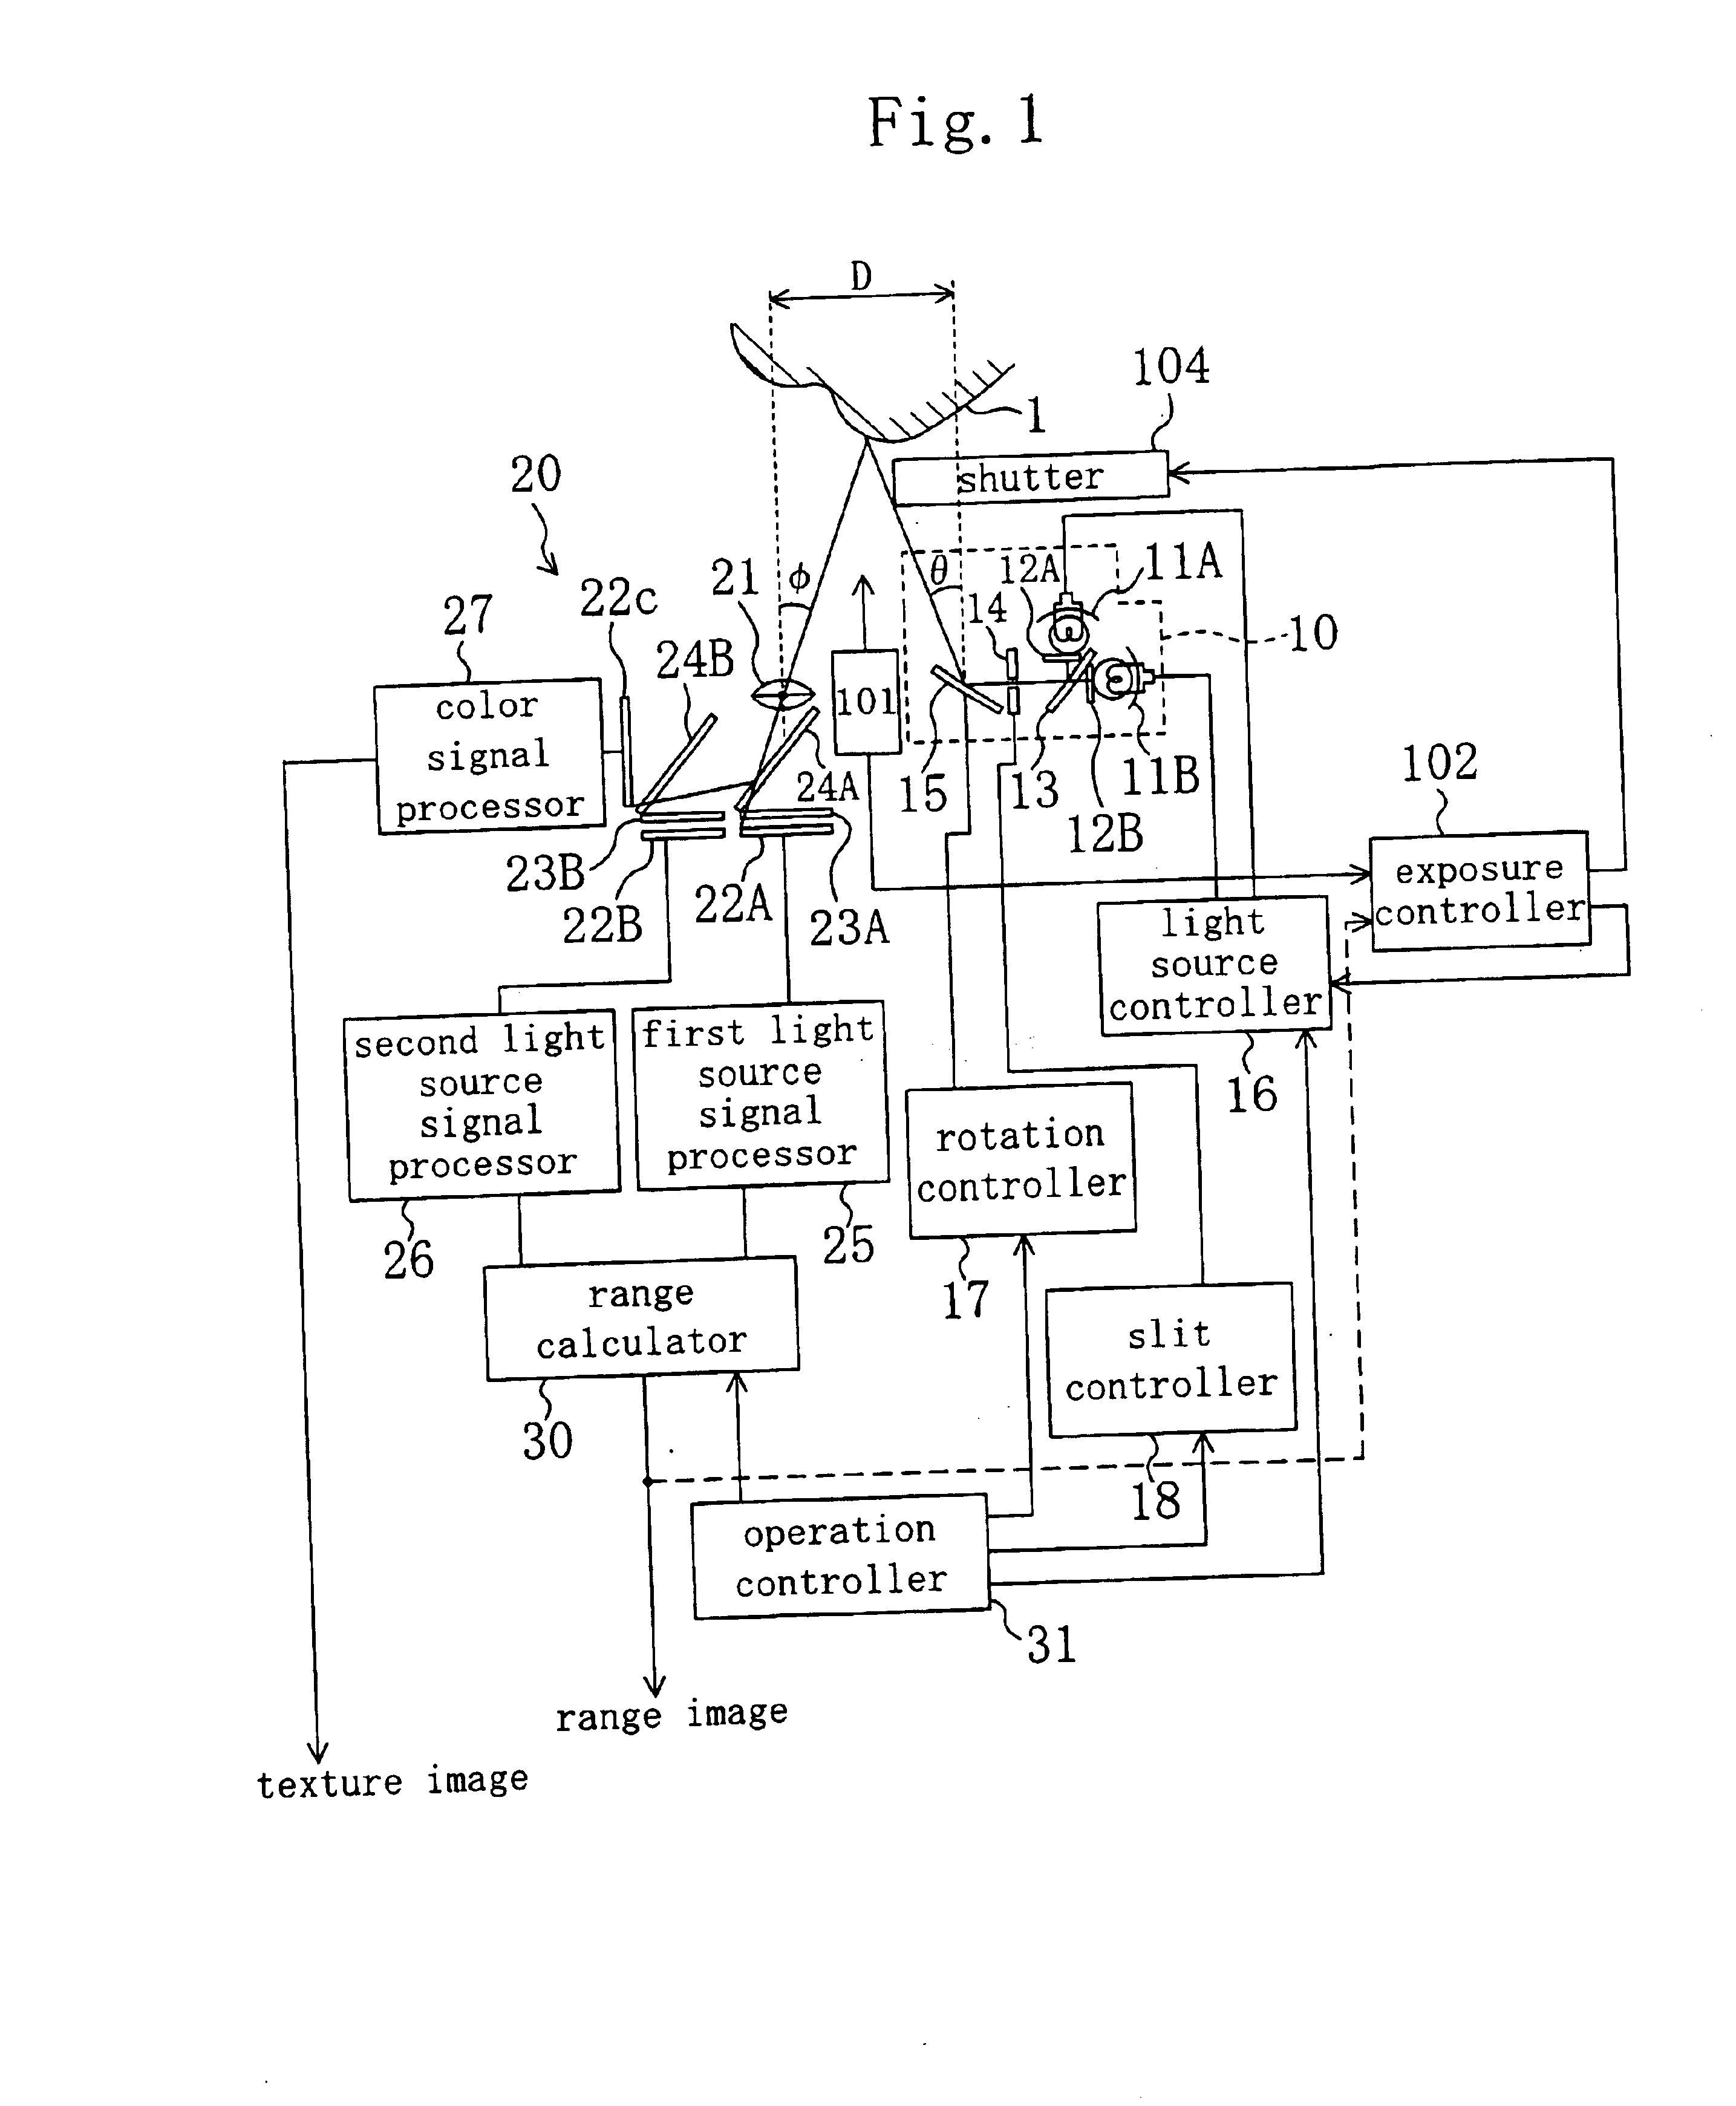 Rangefinder for obtaining information from a three-dimensional object